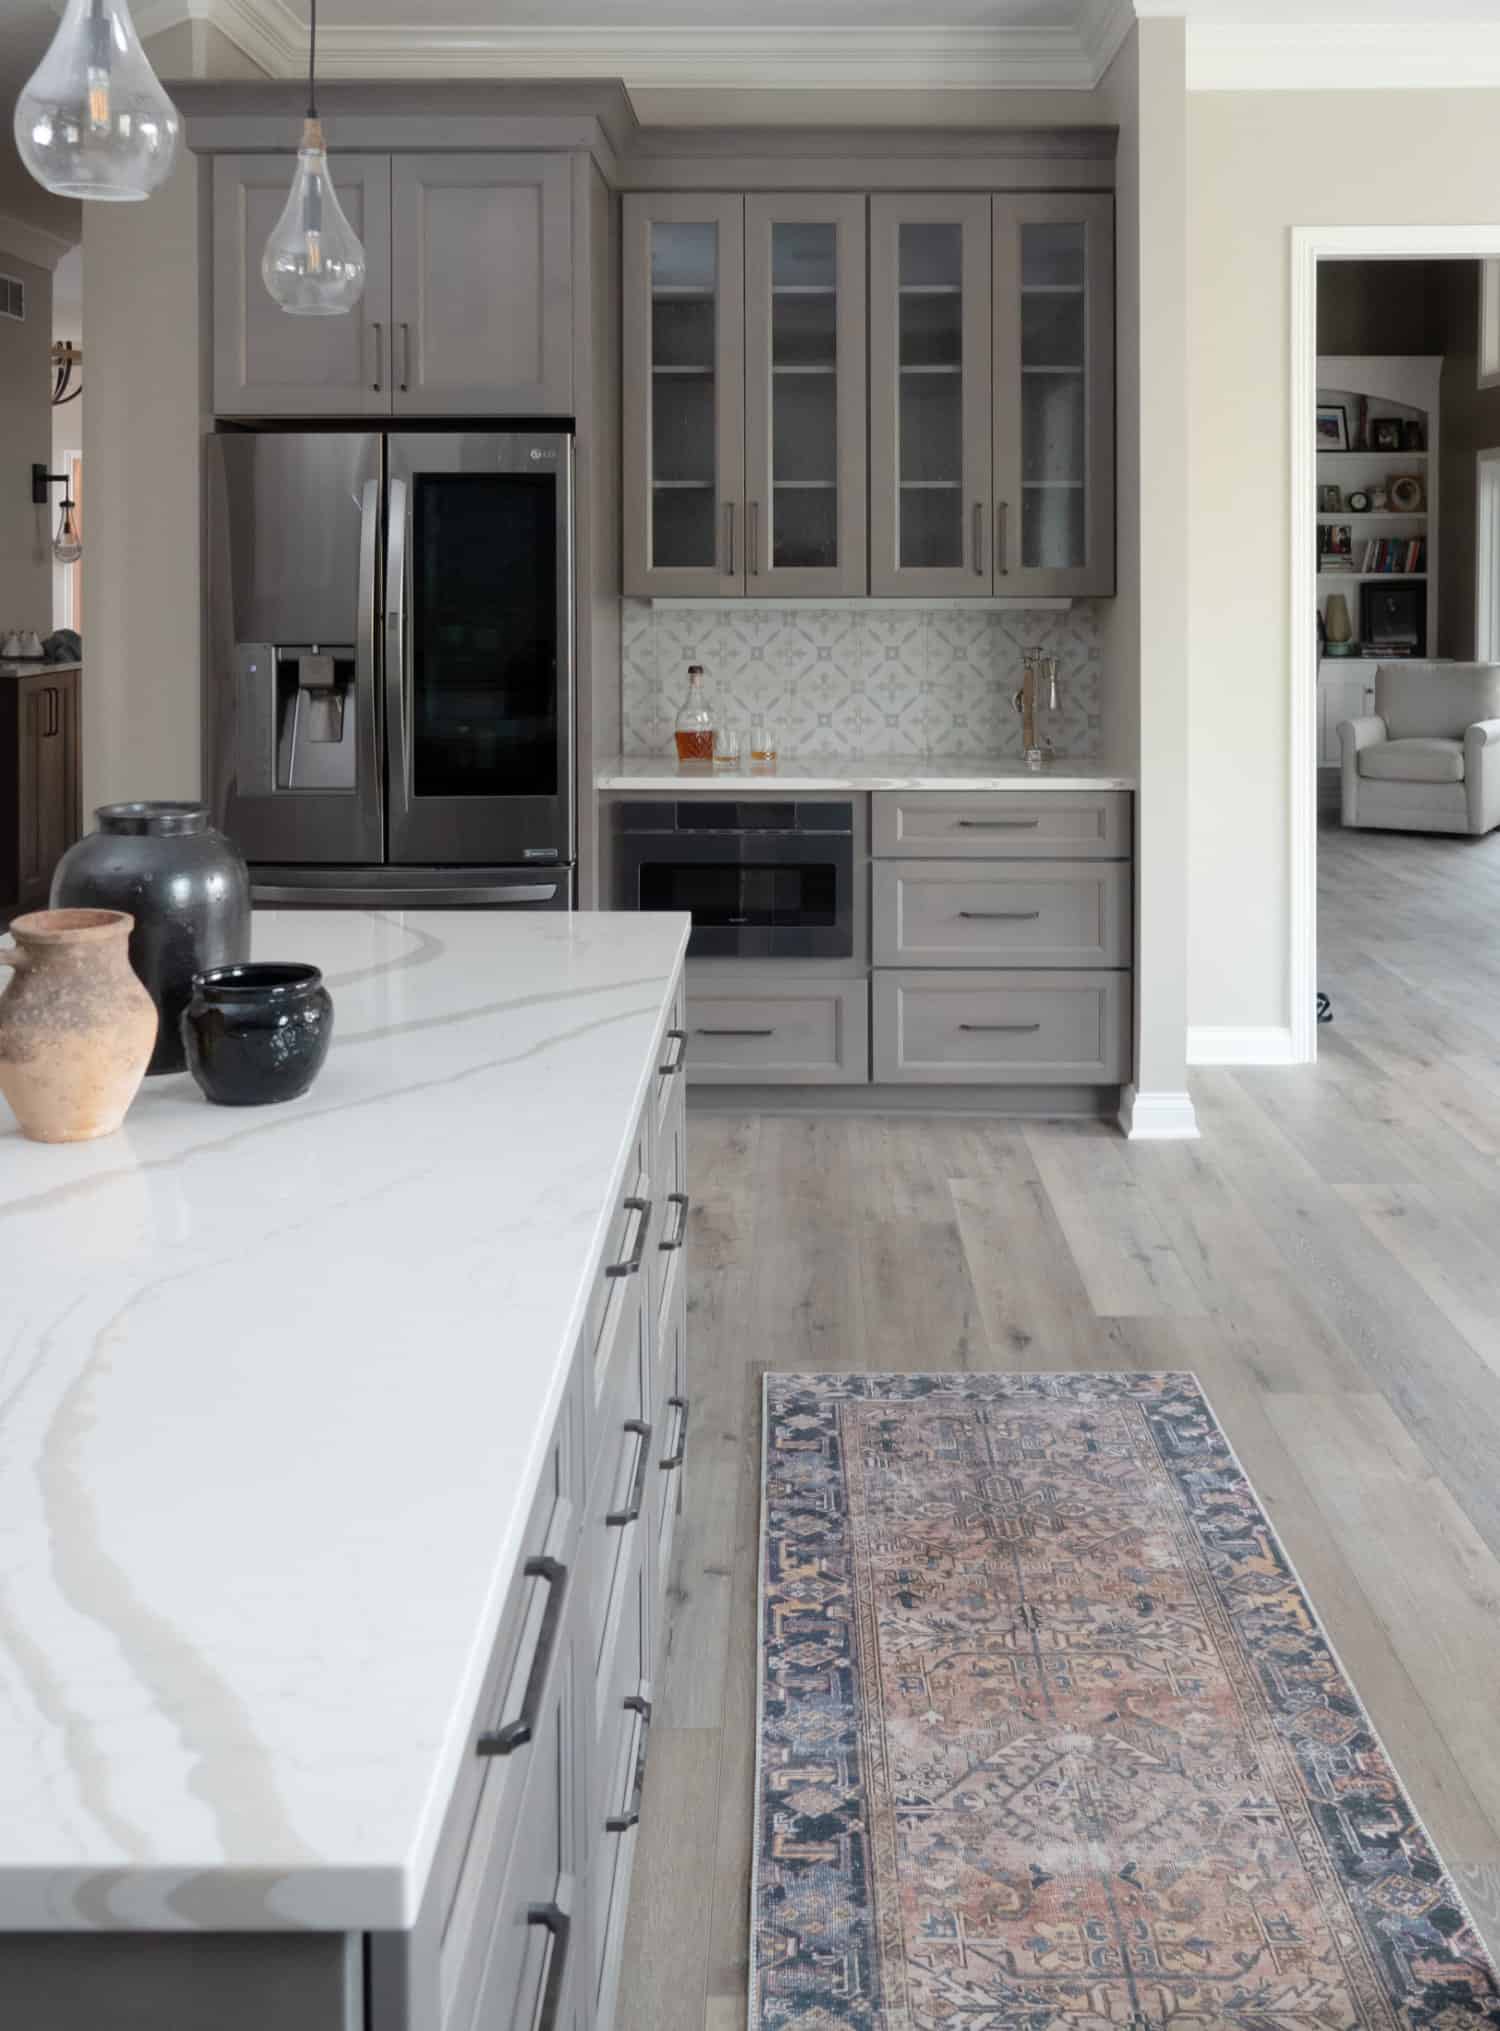 Nicholas Design Build | A remodel of a kitchen with gray cabinets and a rug on the floor.